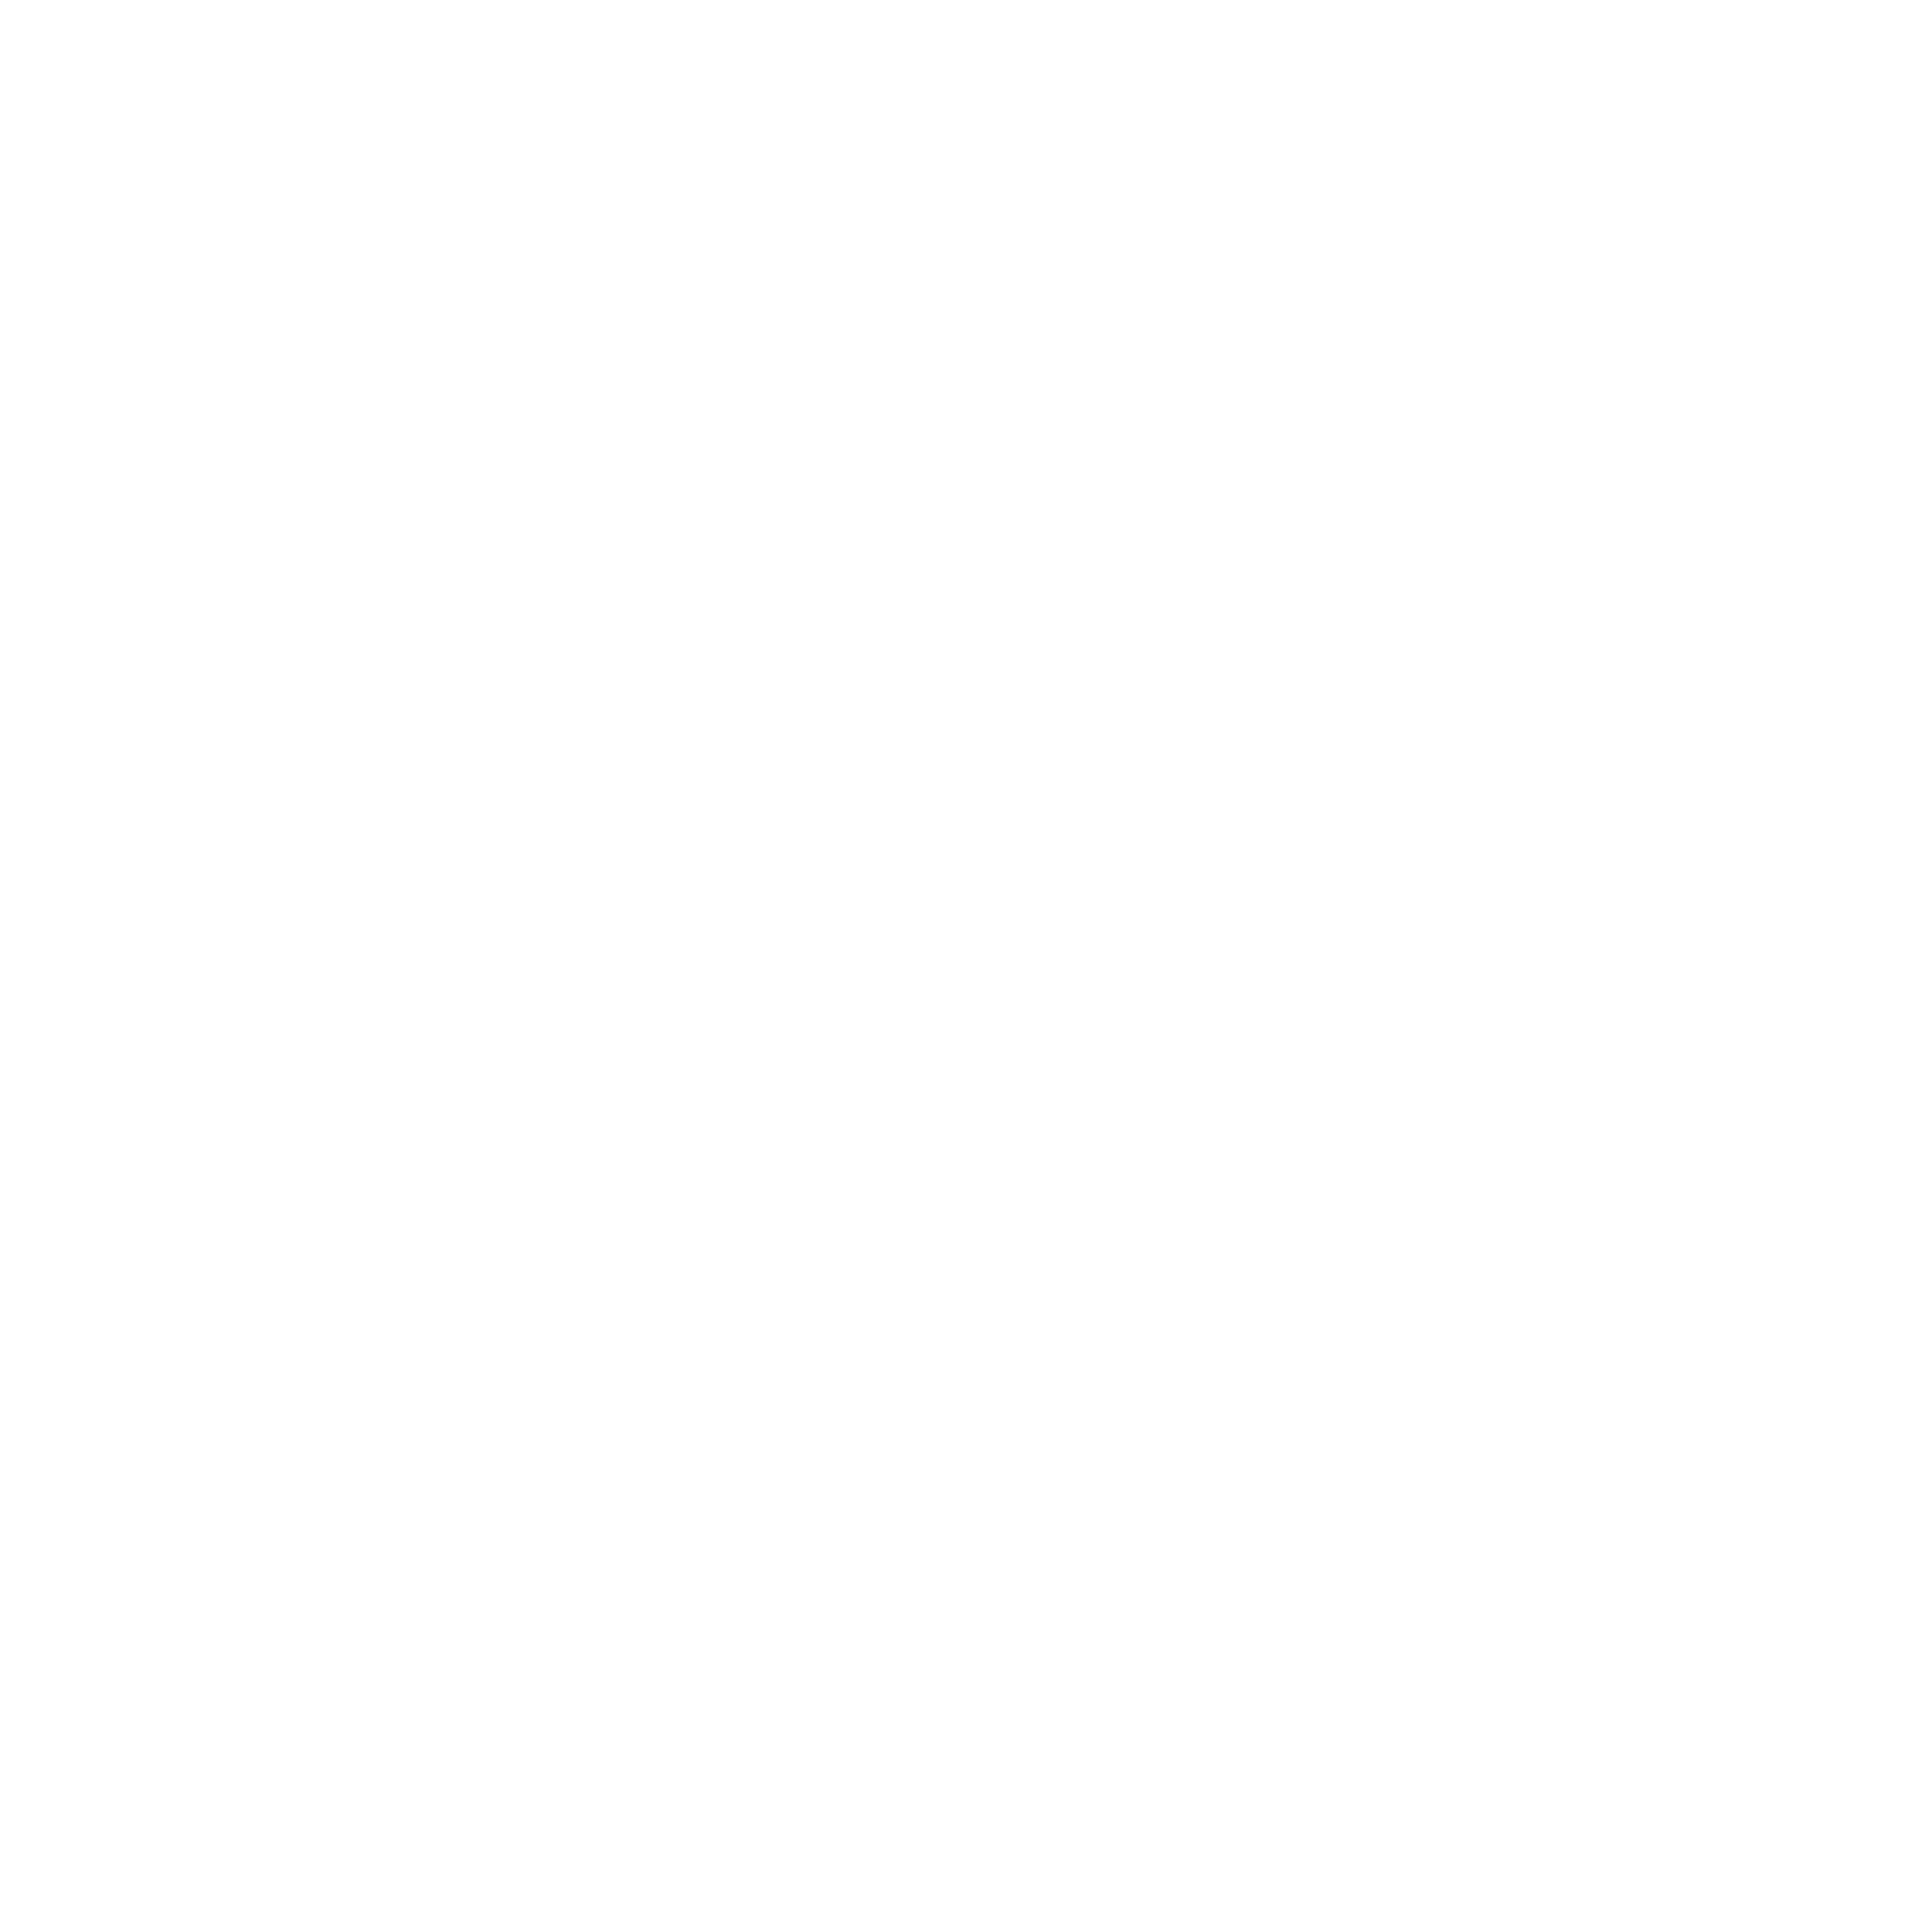 The Mooney Group